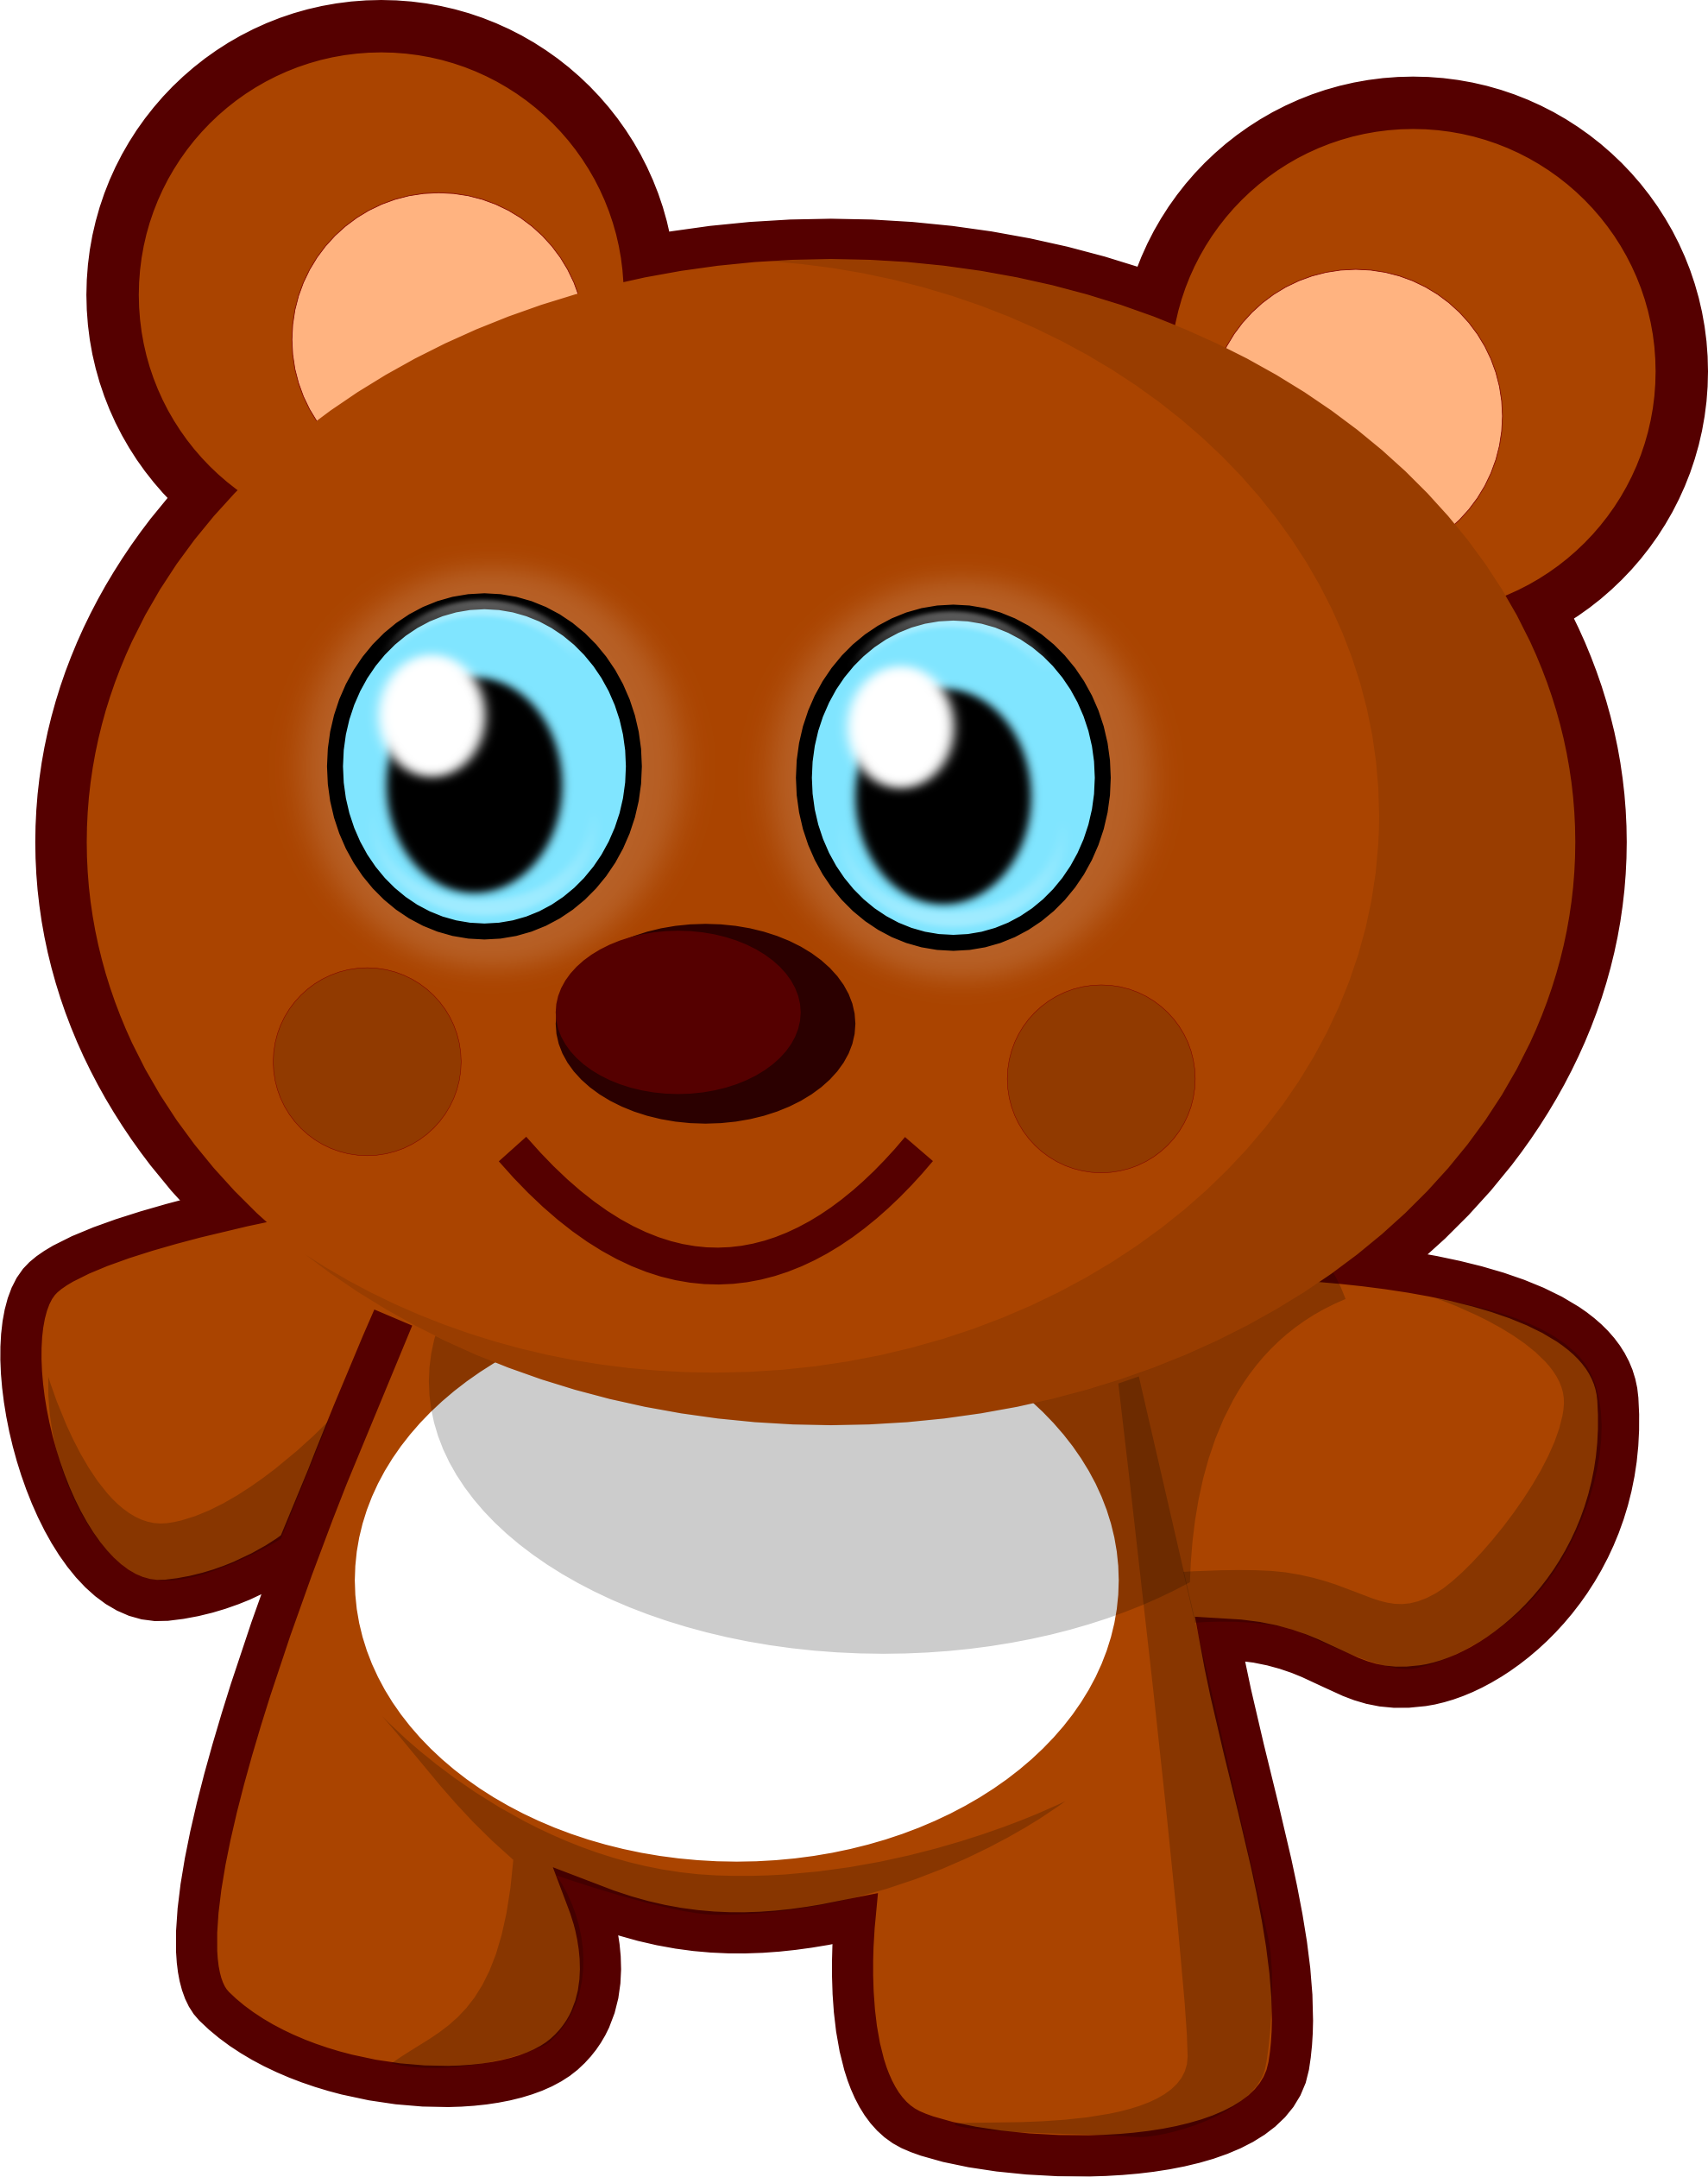 Toy Clipart cute